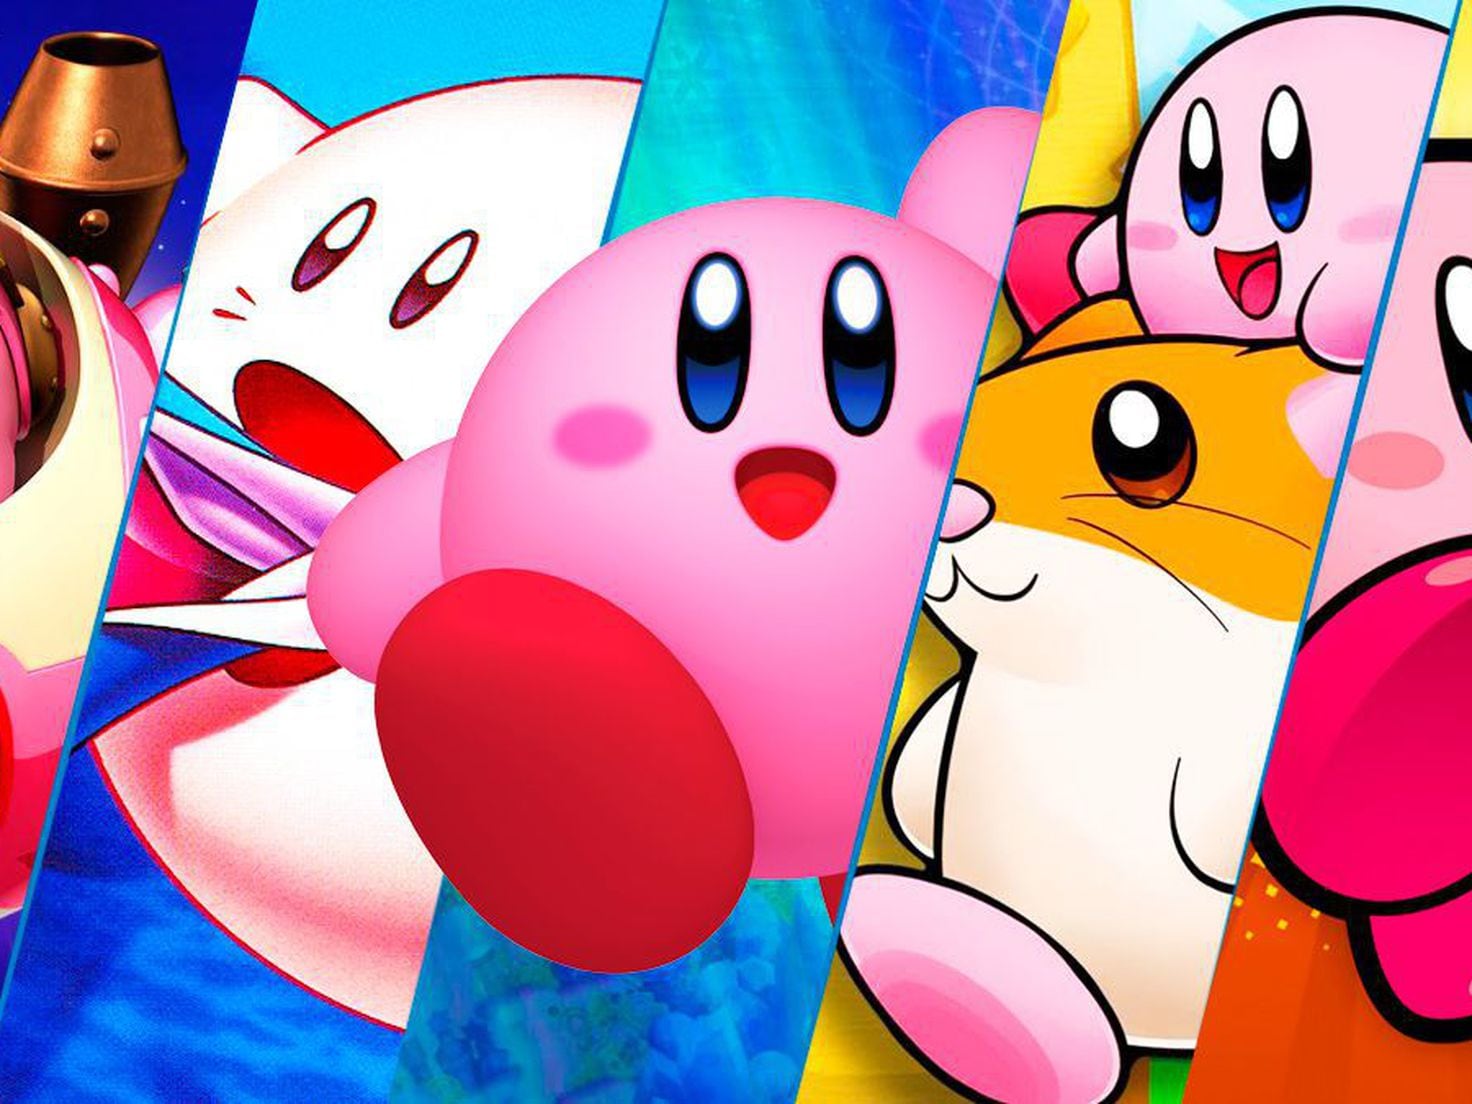 Kirby and the Forgotten Land feels like the beginning of a new era